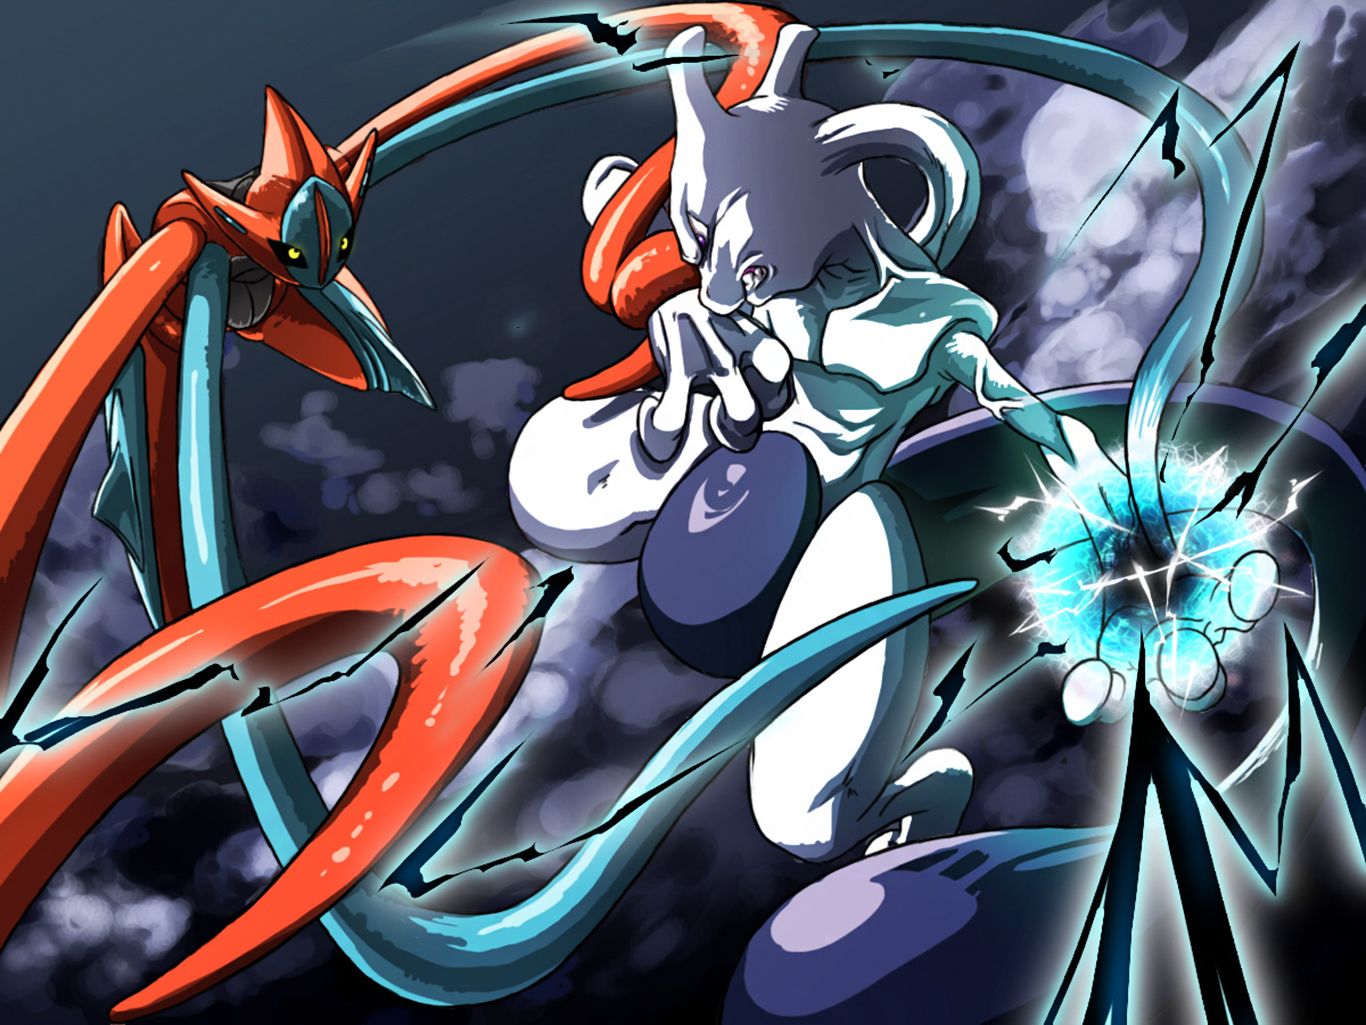 Mewtwo Vs Deoxys Computer Wallpapers, Desktop Backgrounds ...